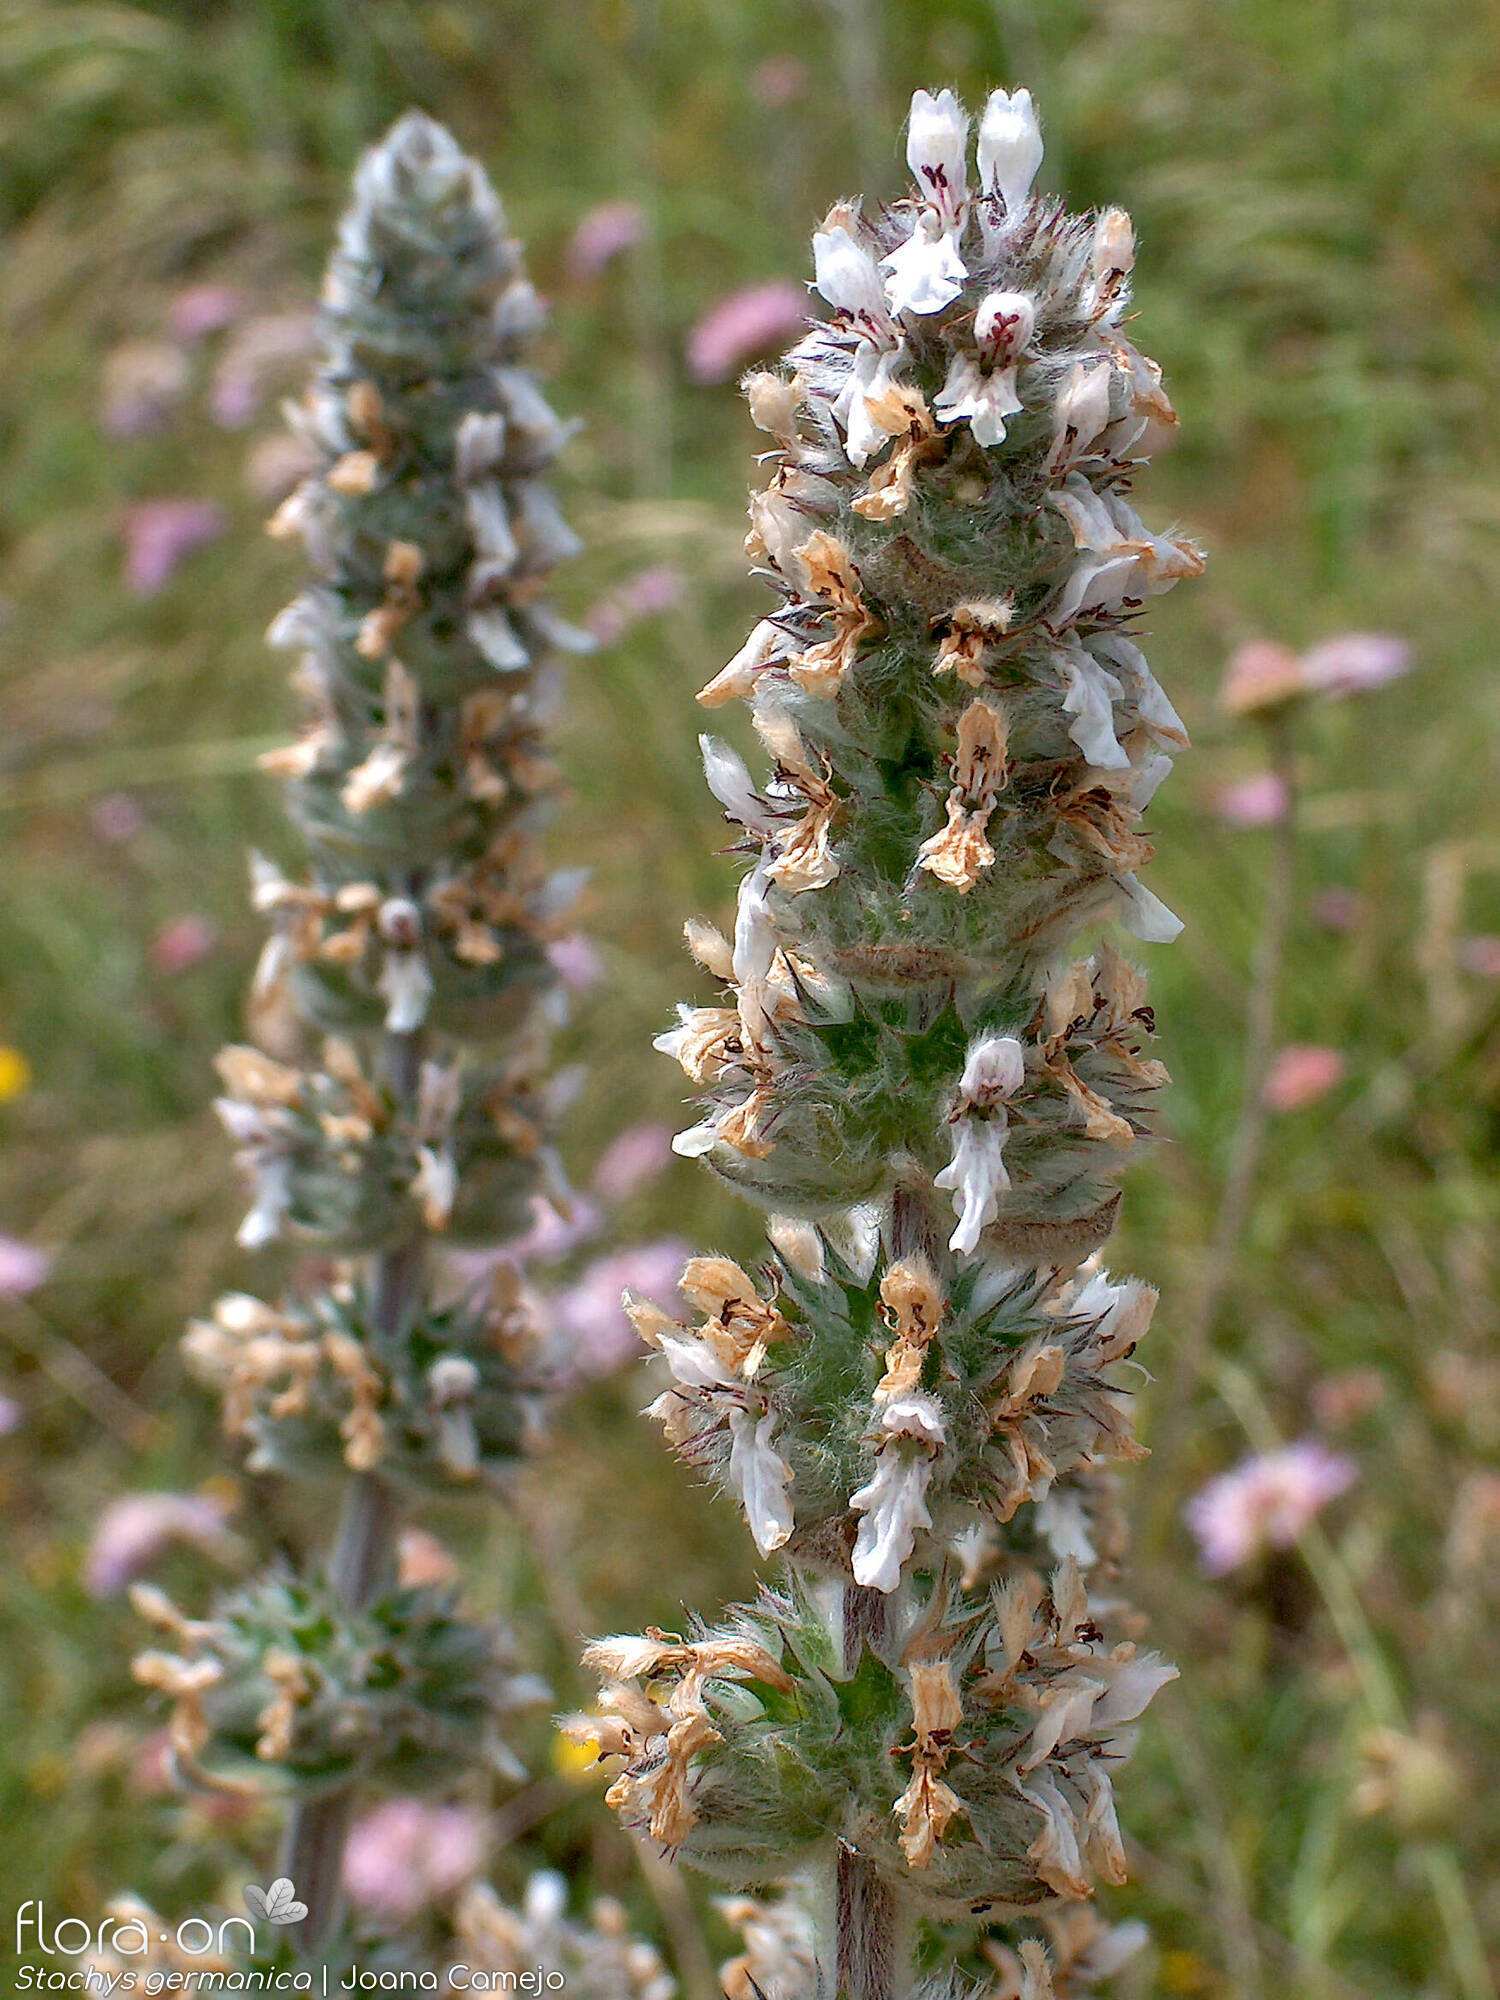 Stachys germanica - Flor (geral) | Joana Camejo; CC BY-NC 4.0